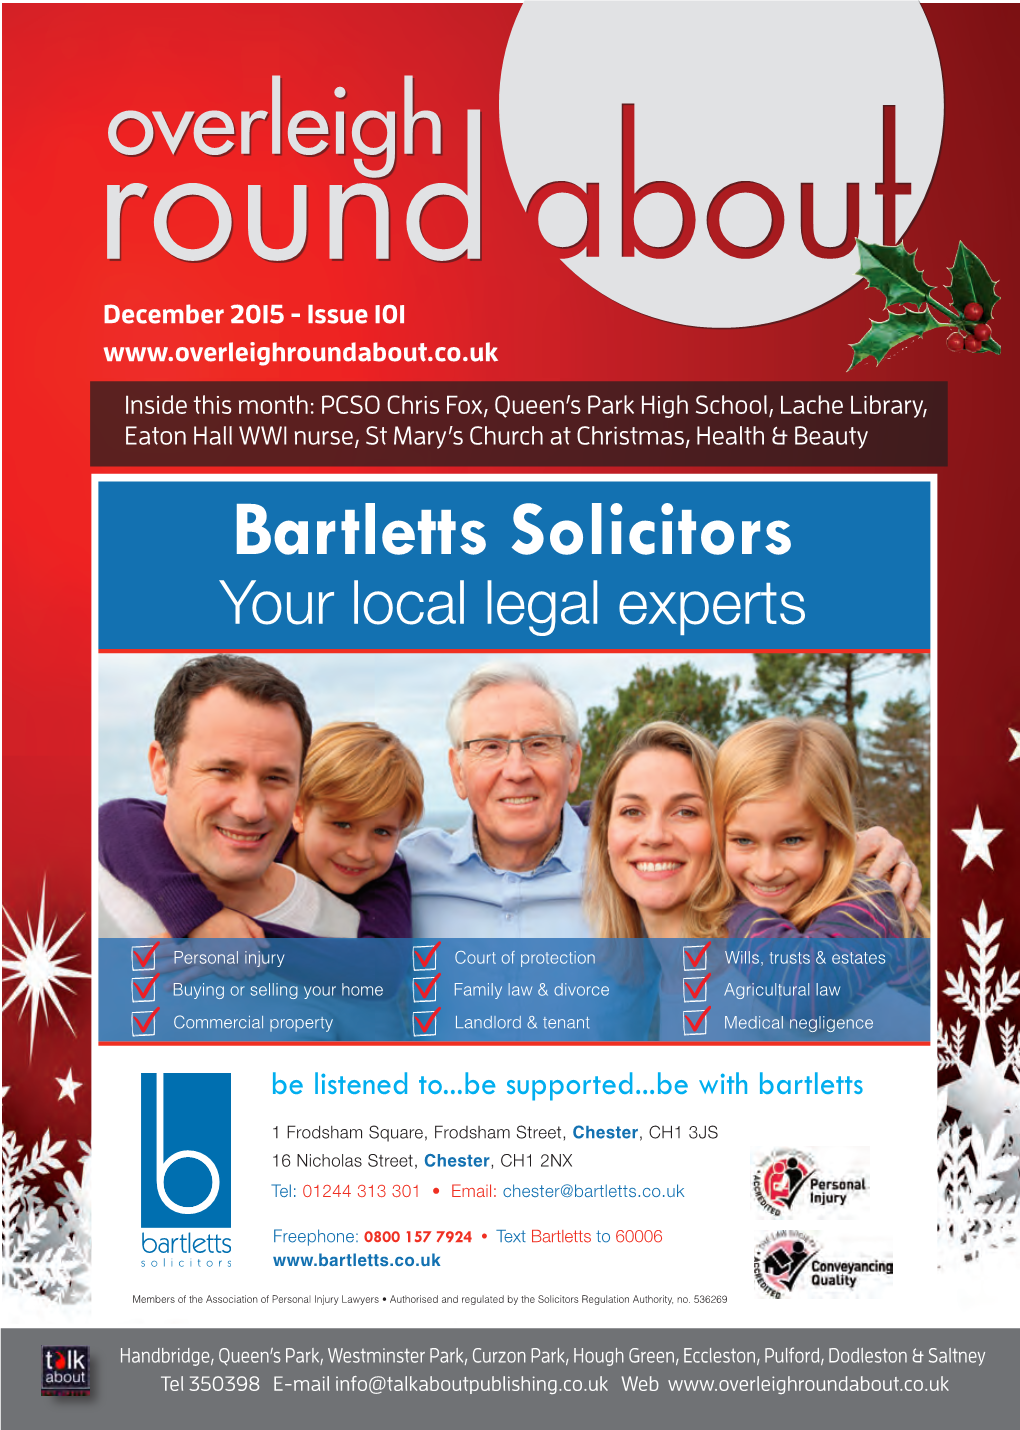 Bartletts Solicitors Your Local Legal Experts